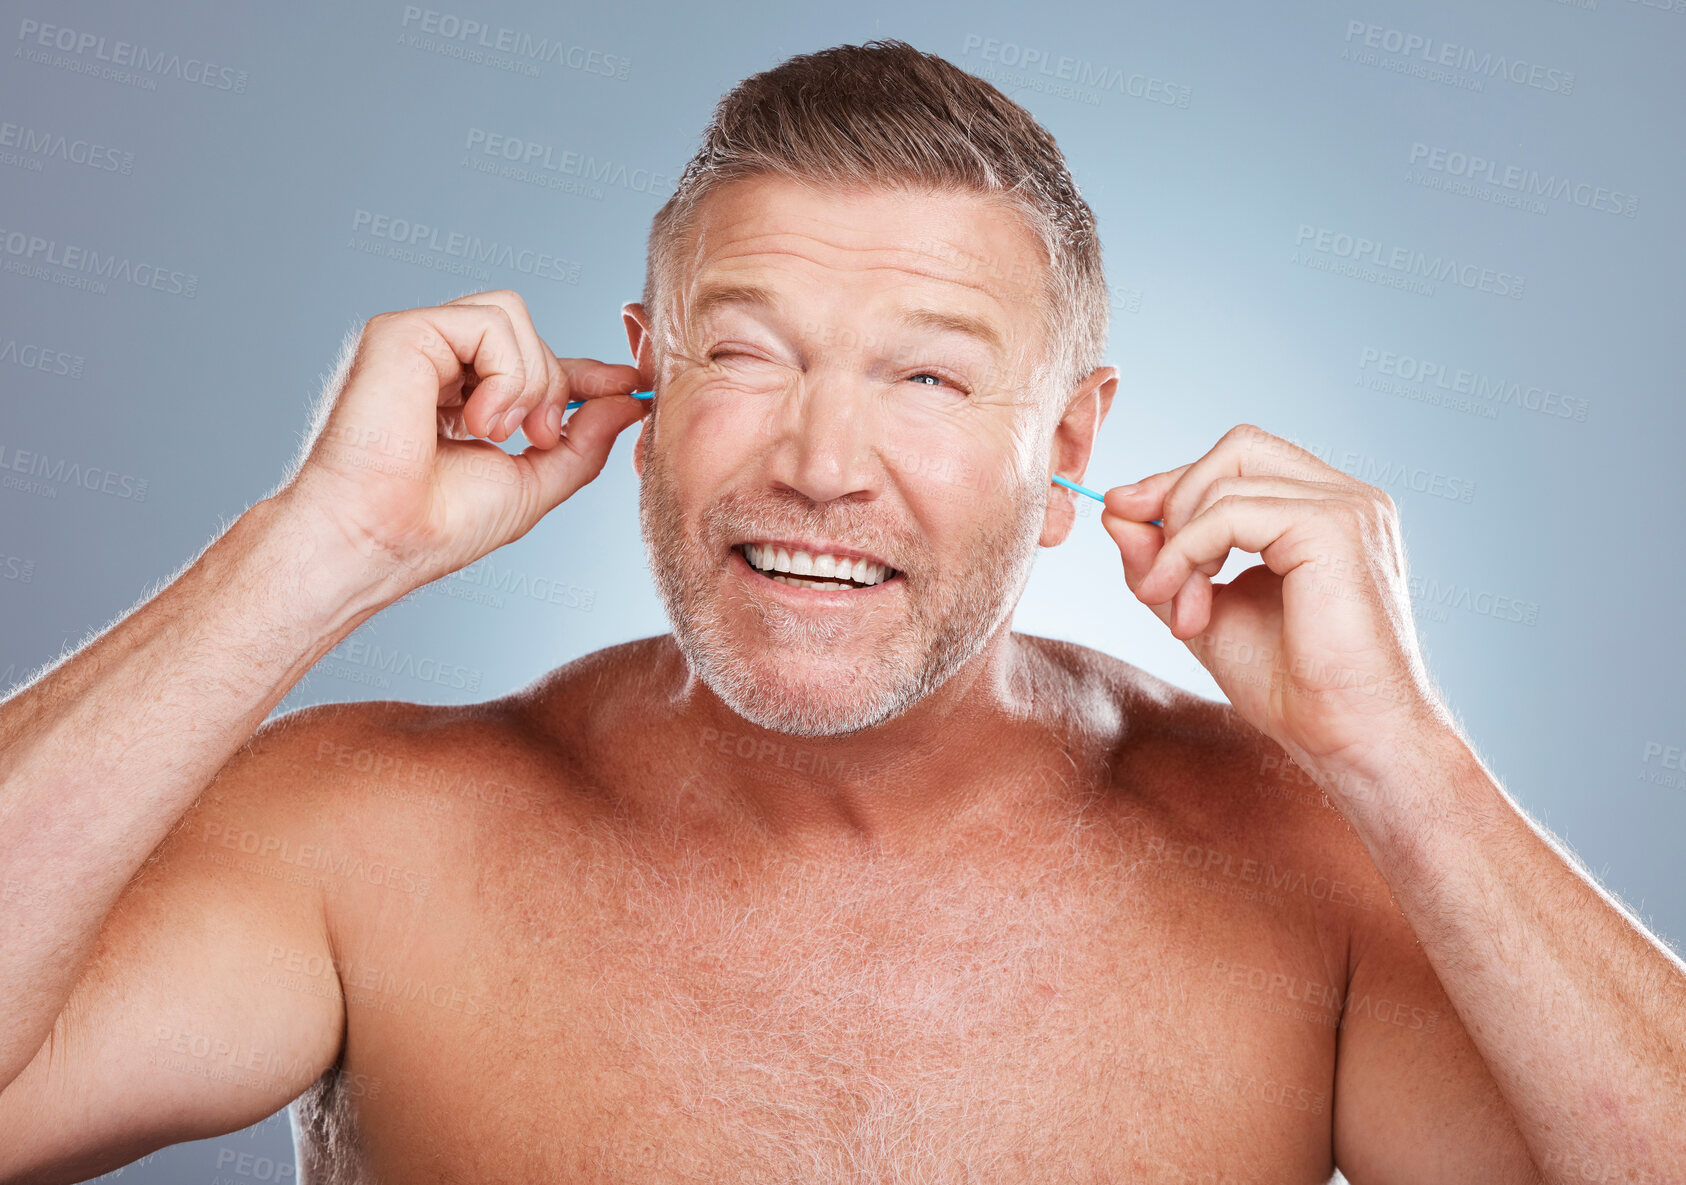 Buy stock photo Earbuds, health and man cleaning his ears in a studio for self care and funny hygiene. Beauty, wellness and healthy mature guy doing his morning grooming routine isolated by a gray background.